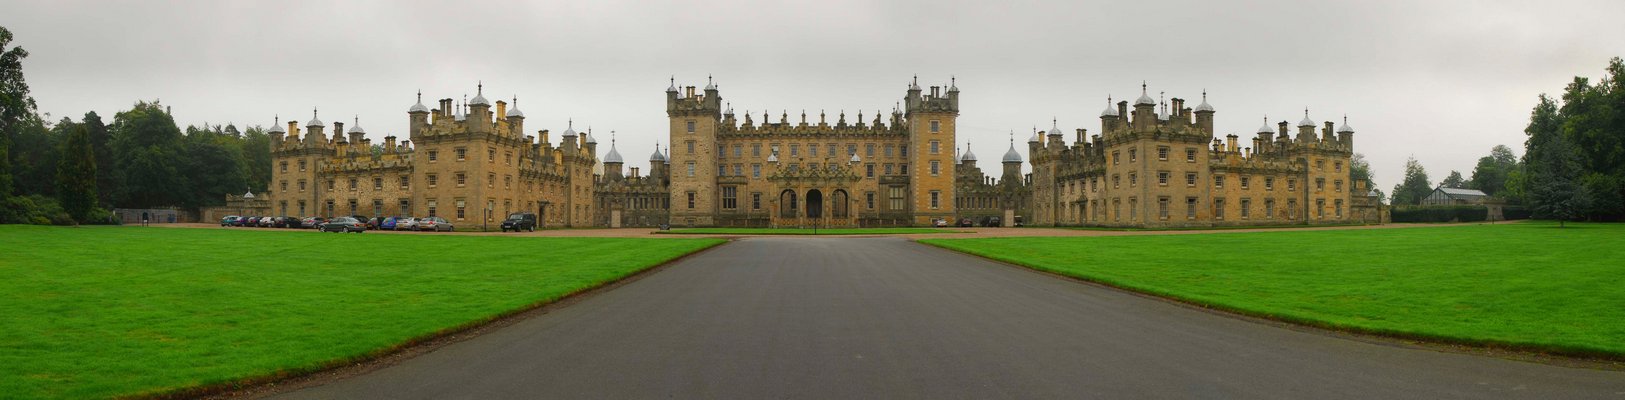 Floors Castle on the western outskirts of Kelso, south-east Scotland.     Mihael Grmek